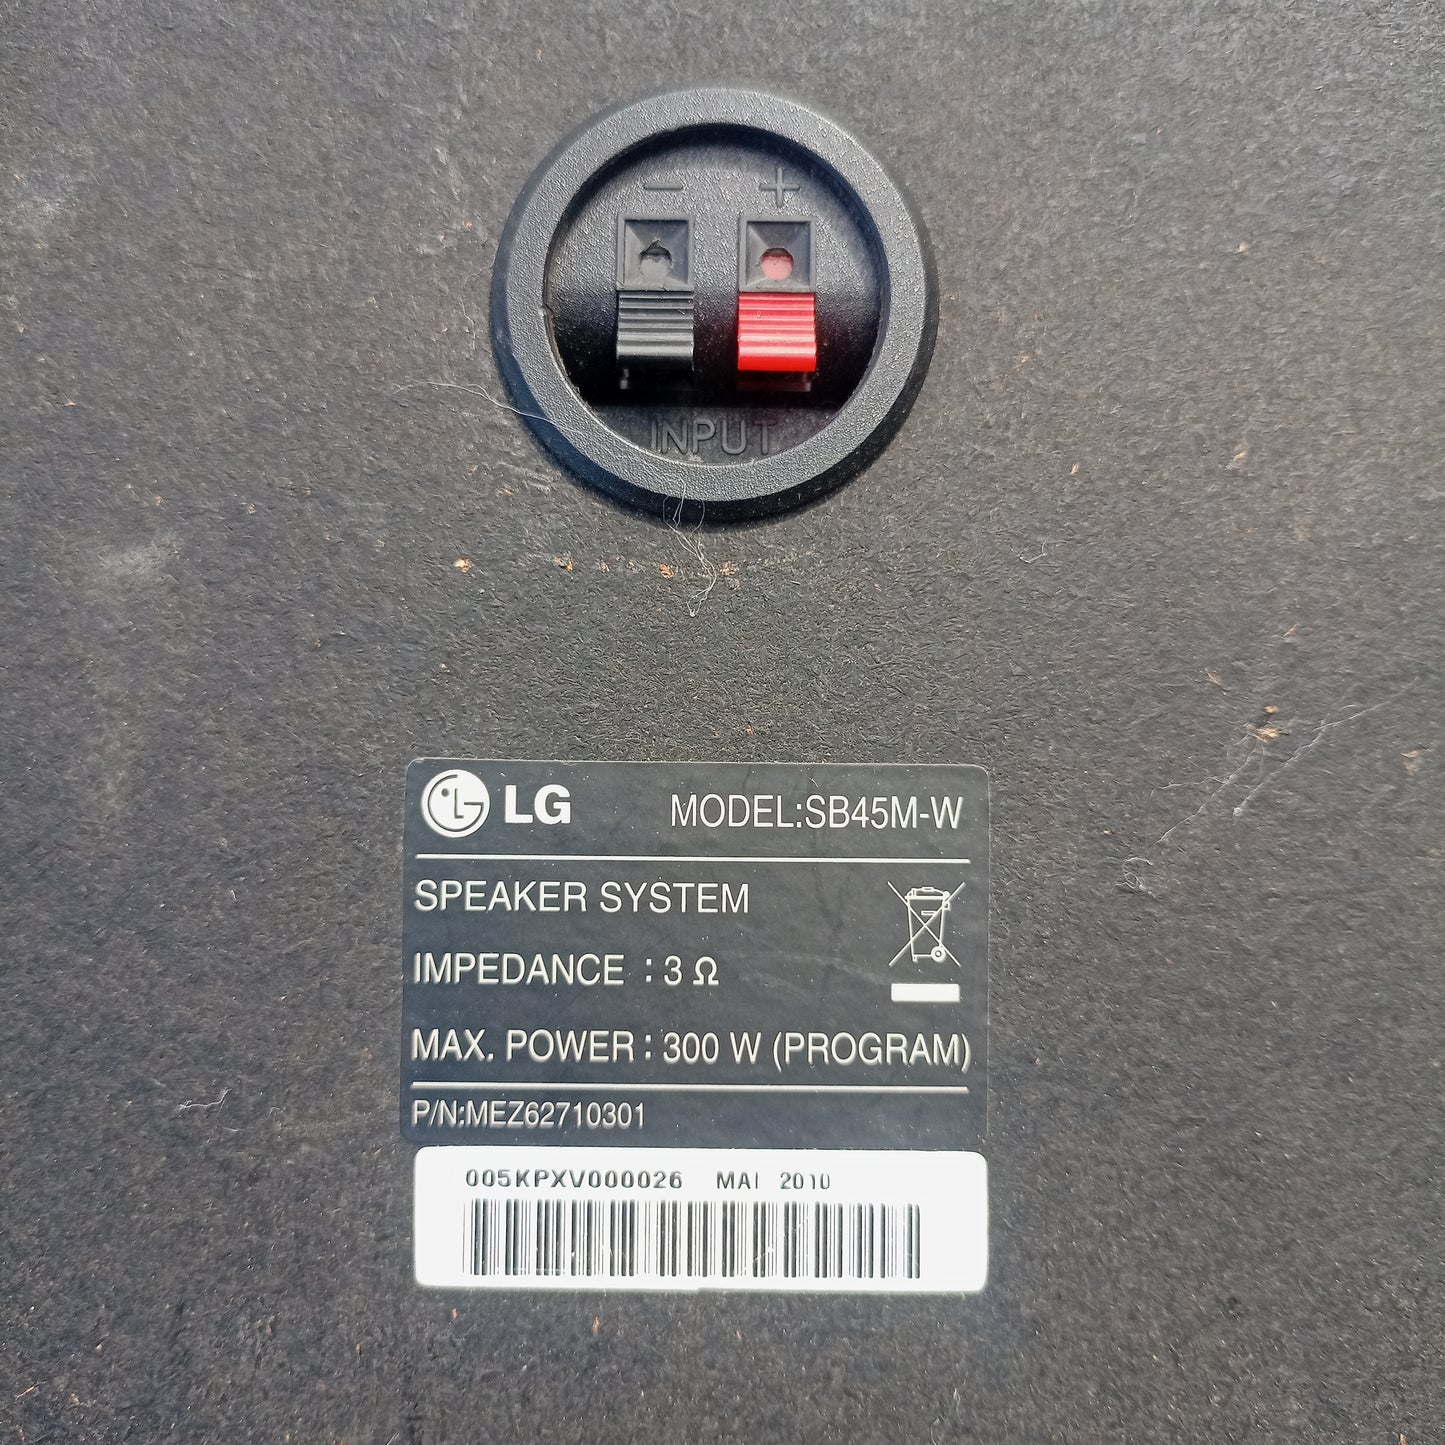 LG SB45M-W 300W 3 ohms Subwoofer - Foreign Used